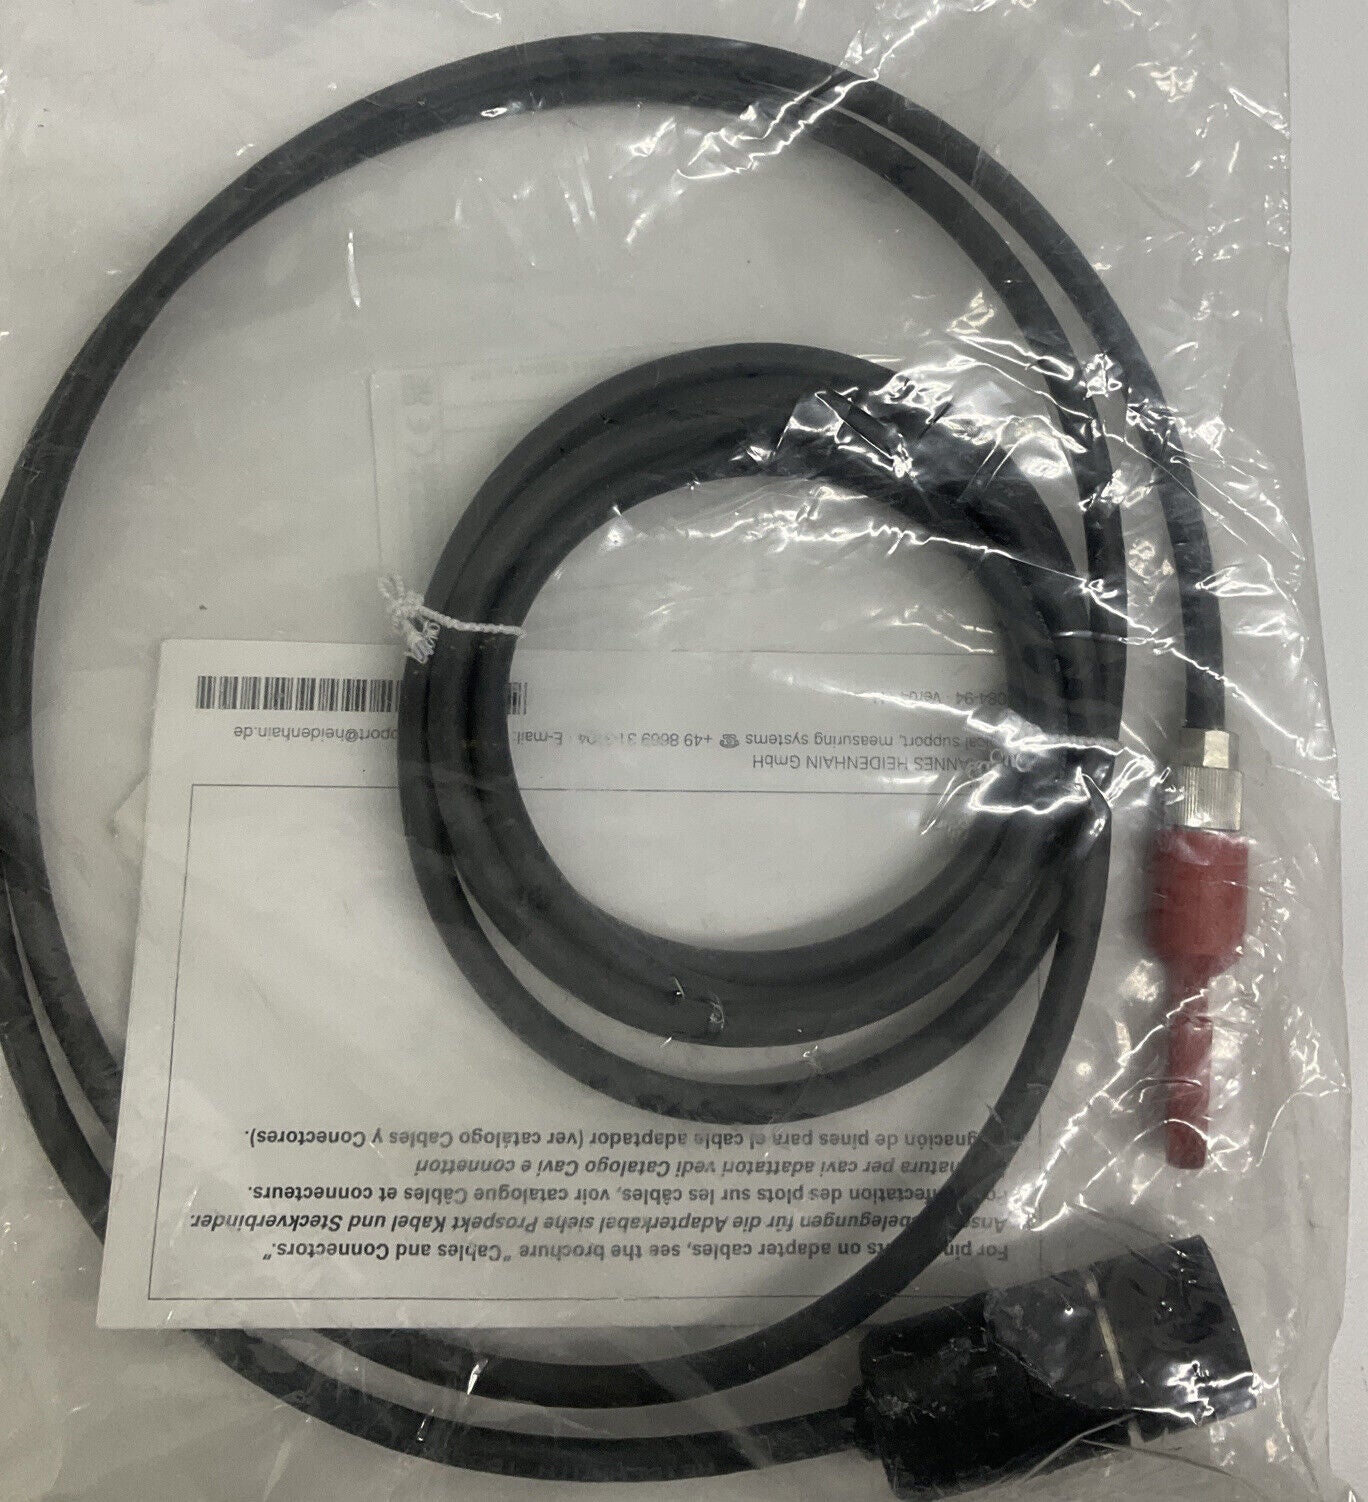 Heidenhain 533631-03 Linear Encoder Cable Assembly 3-Meters (CBL109)